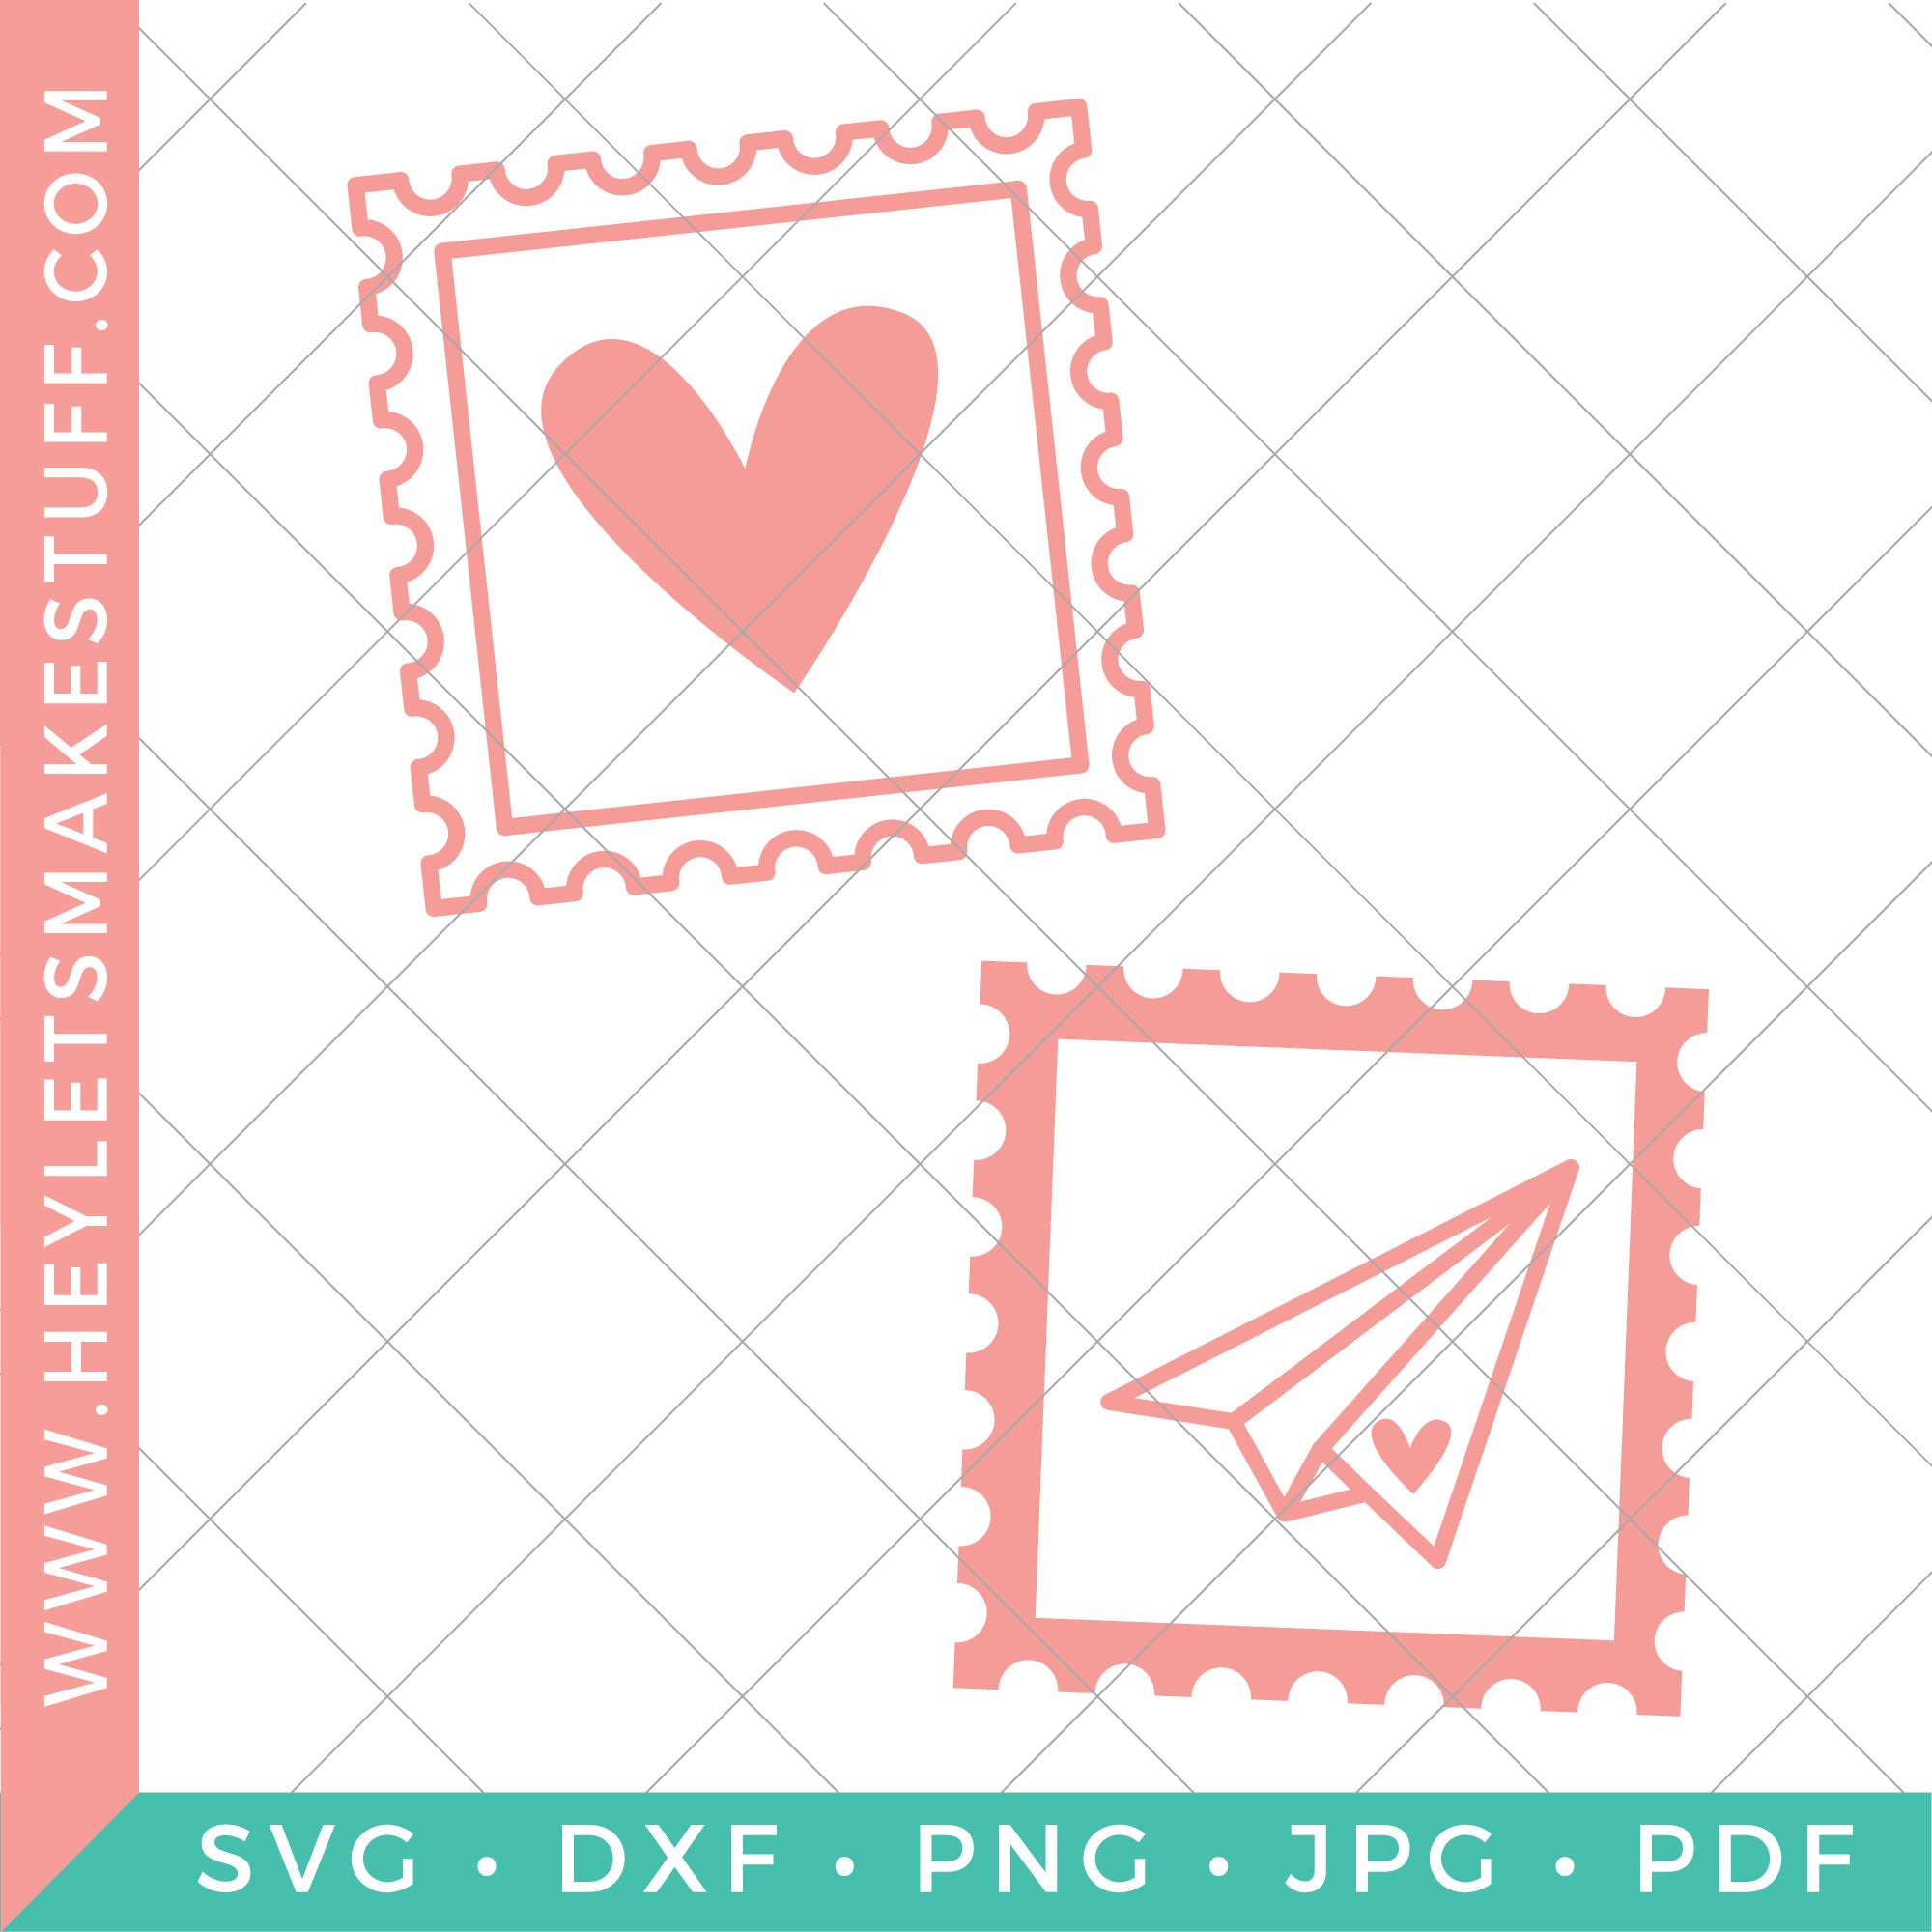 Love Stamps – Hey, Let's Make Stuff